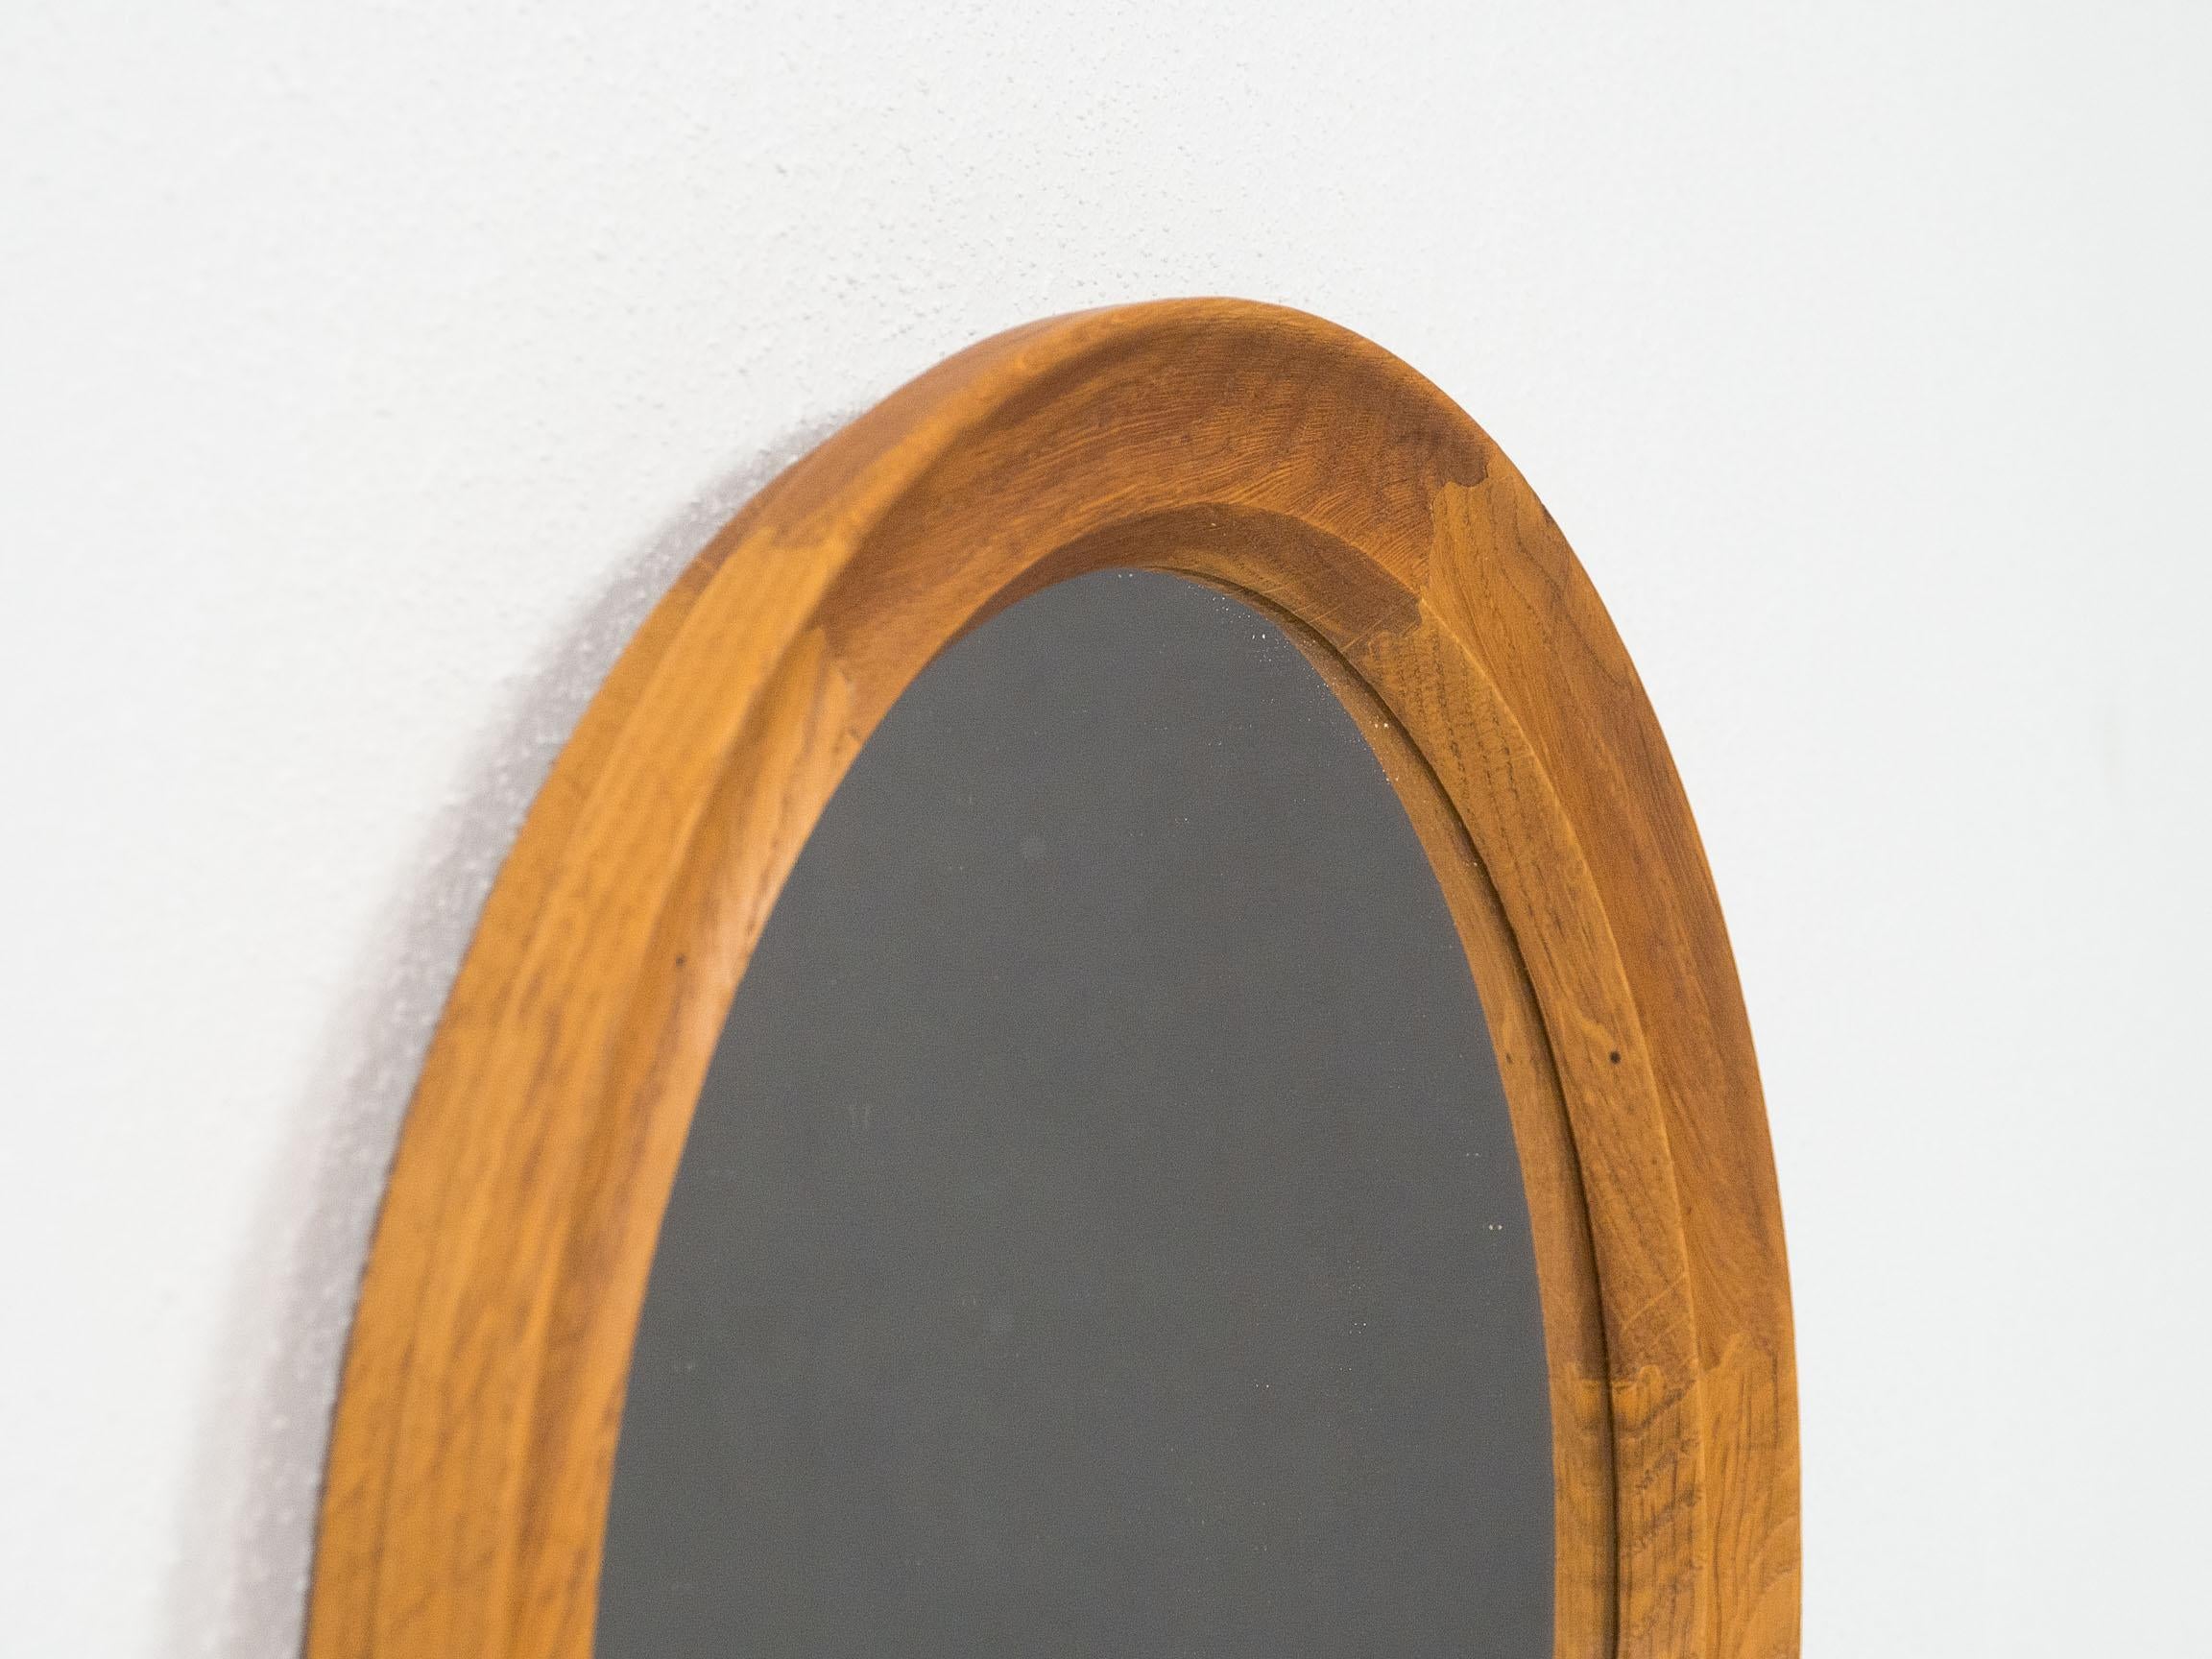 Round mirror from Denmark, 1960s.

This mirror is made from solid pieces of oak joined in visible finger joints.

The mirror is in good condition, there are a couple specks around the side of the mirror. Please see the photos for this.